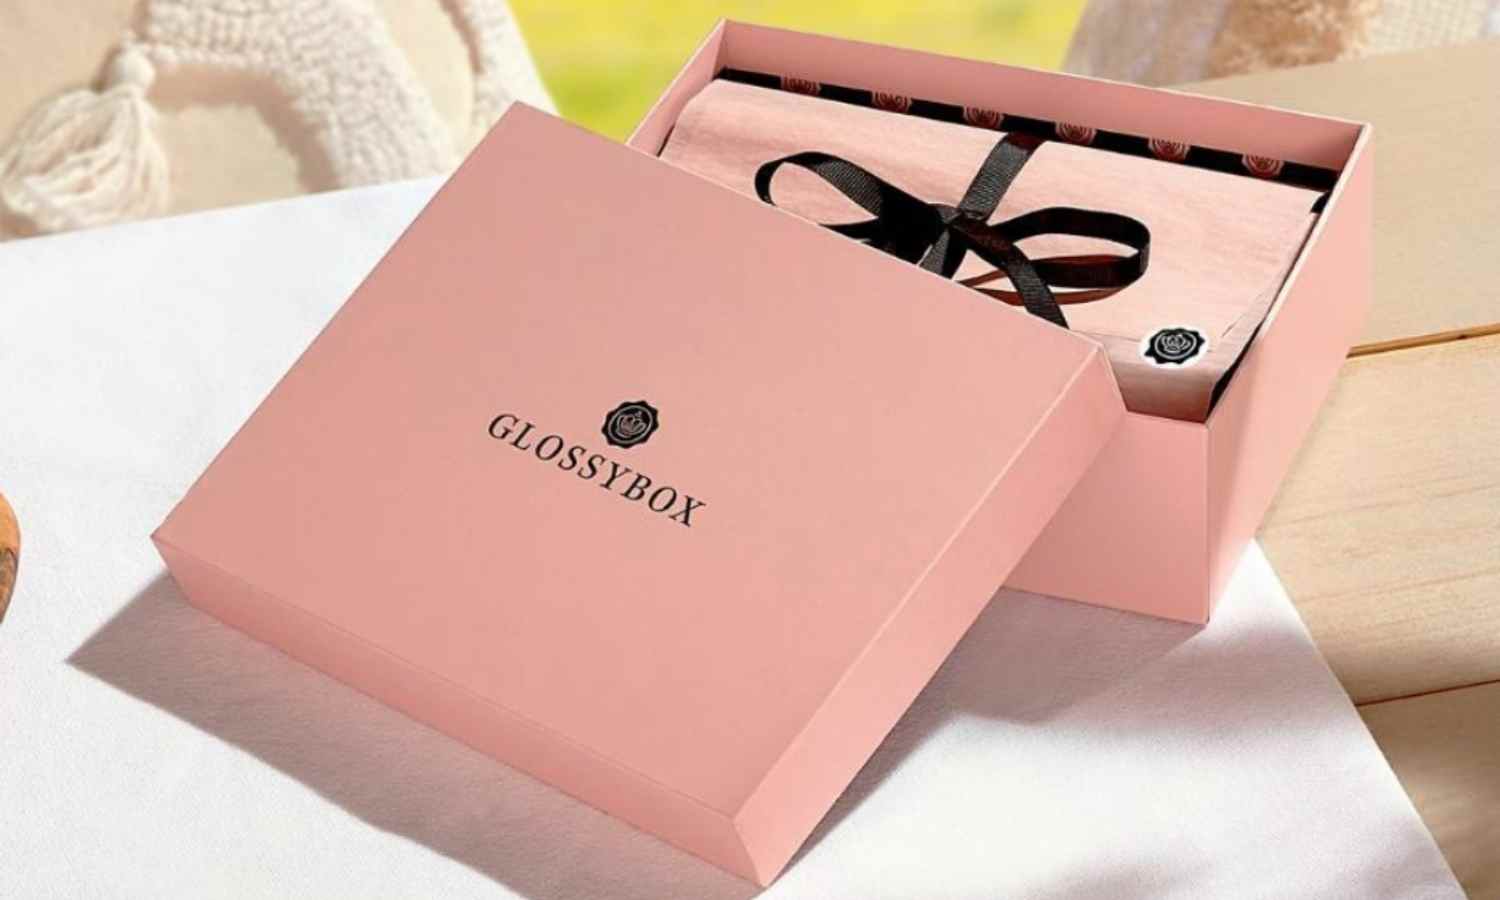 glossybox review